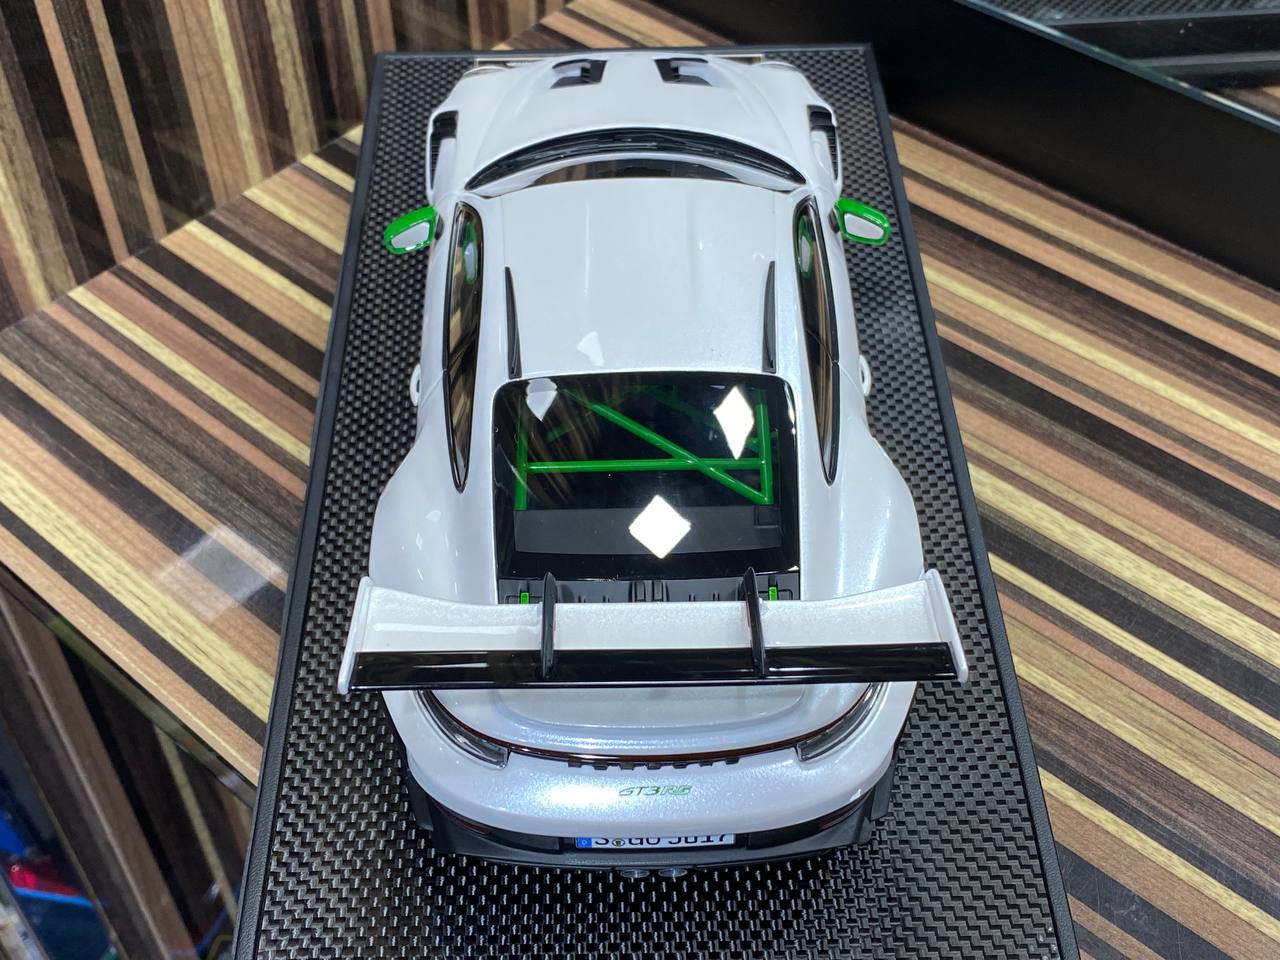 1/18 Porsche 911 GT3 RS Green Rim 10/49 white and green by Timothy & Pierre